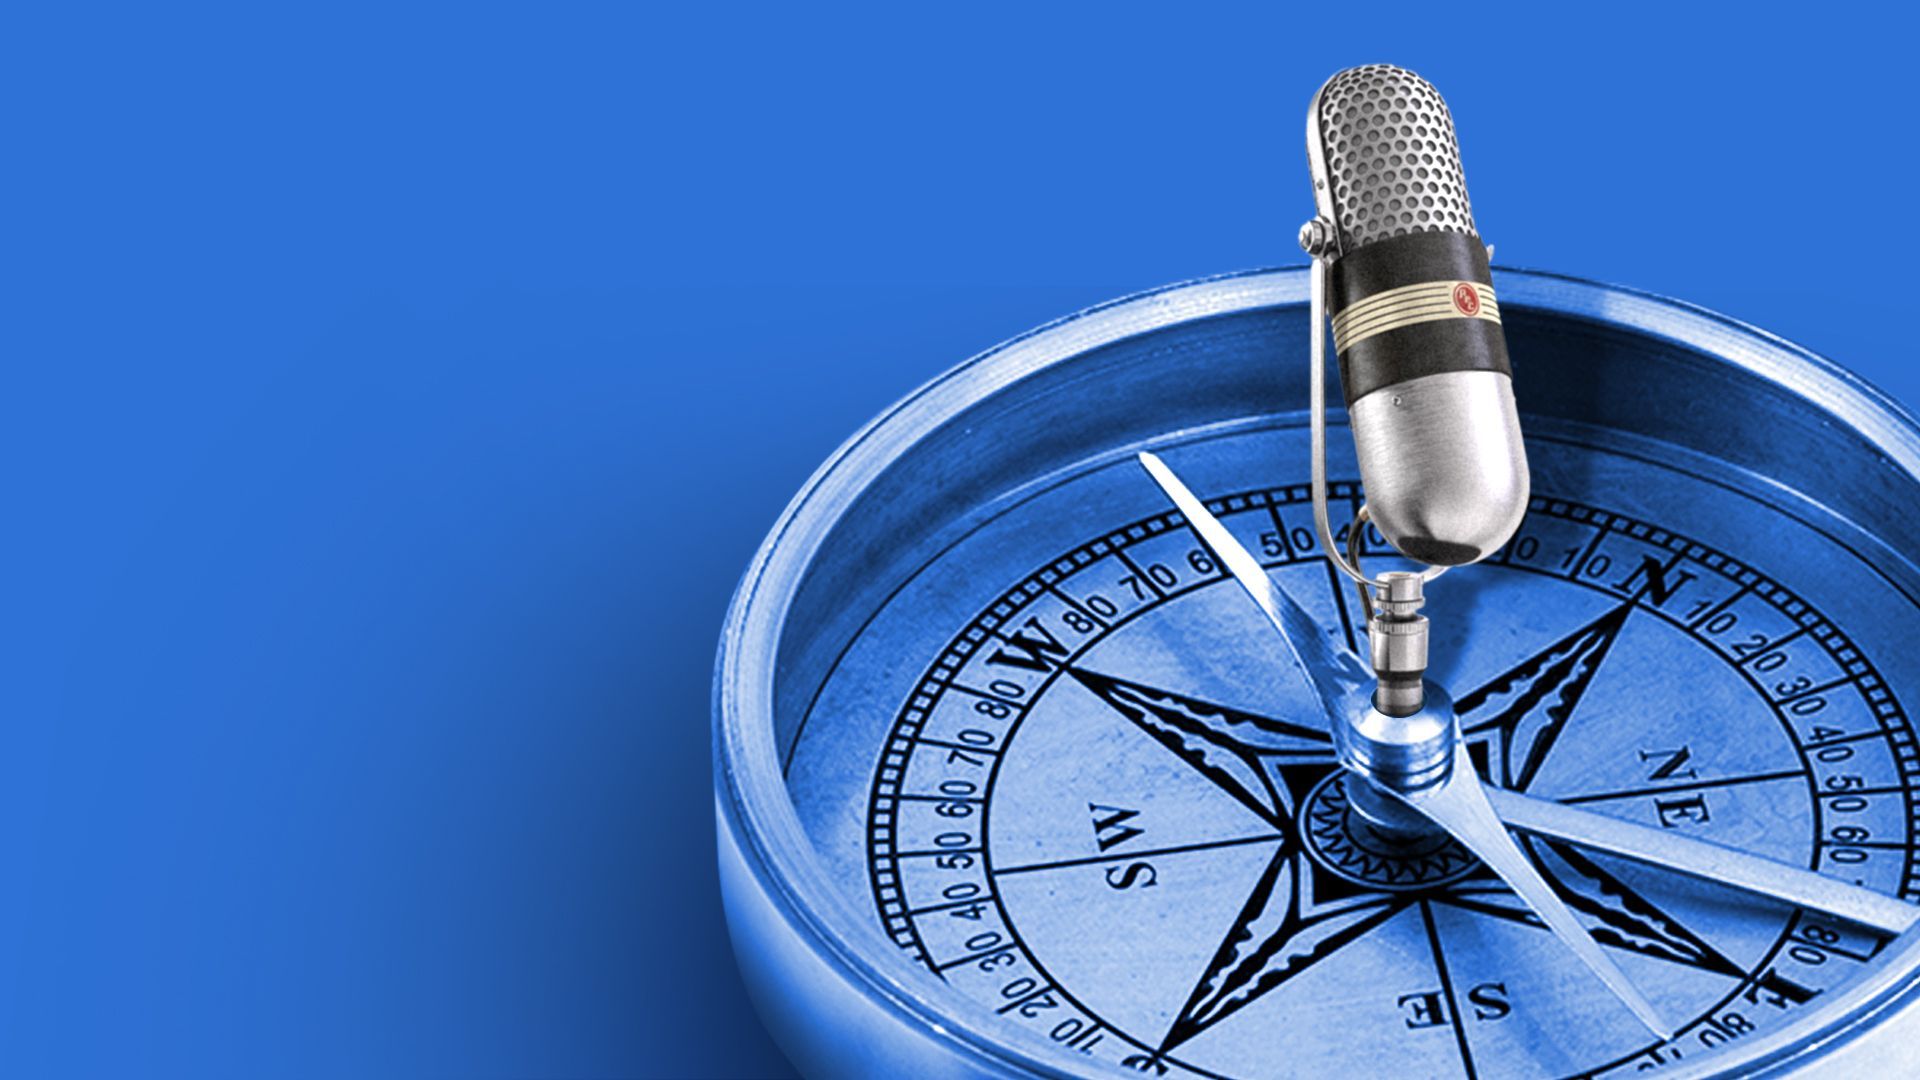 Illustration of a large compass with a microphone extending from the center